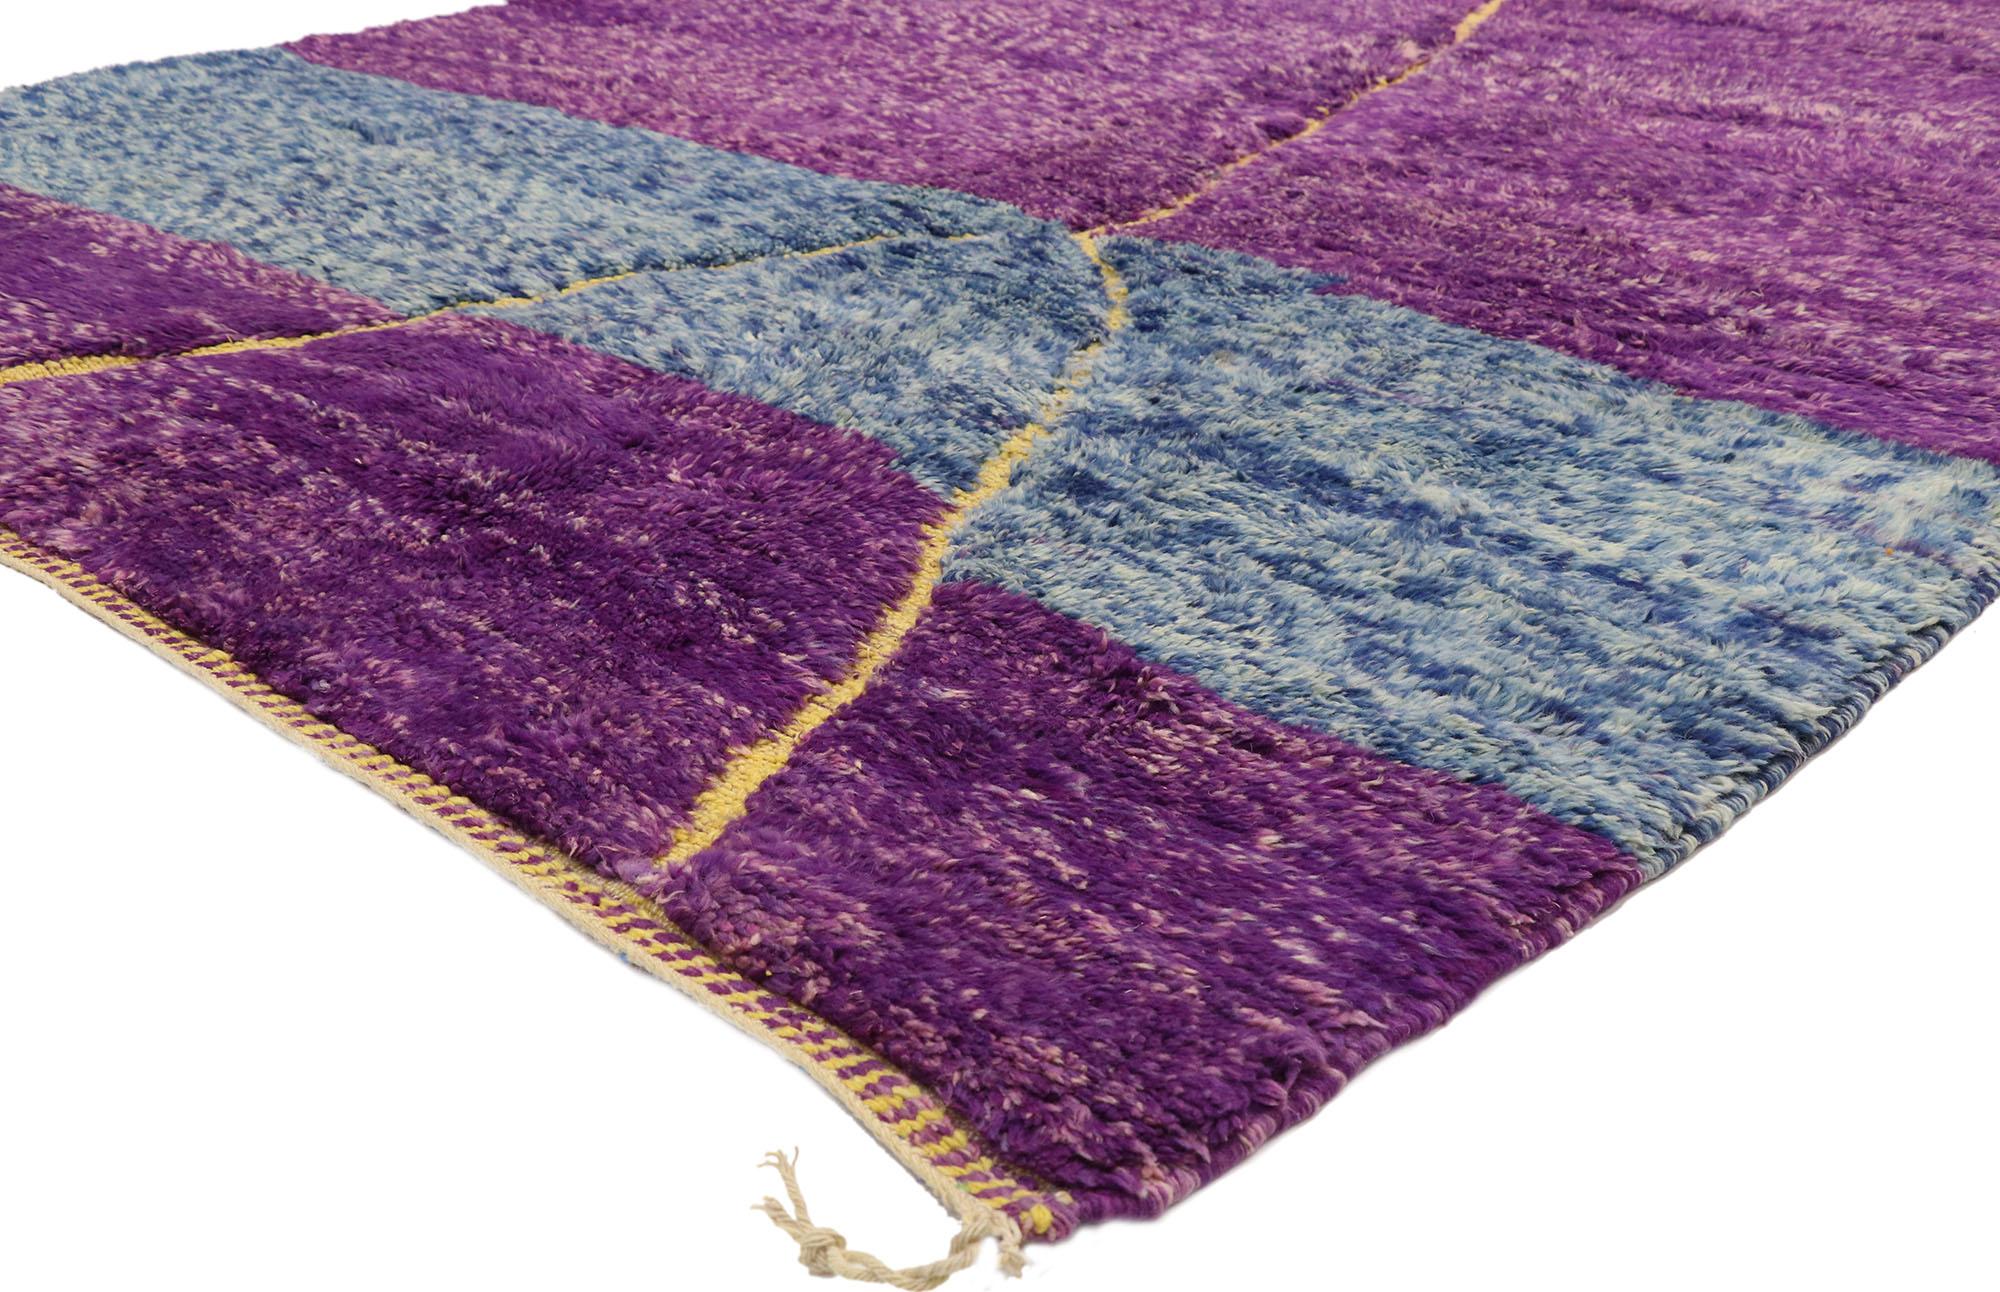 20994 Purple Beni Mrirt Moroccan Rug, 07'02 x 10'02. Beni Mrirt rugs embody a revered tradition of Moroccan weaving, renowned for their luxurious texture, geometric patterns, and serene earthy hues. Handcrafted by skilled artisans of the Beni Mrirt